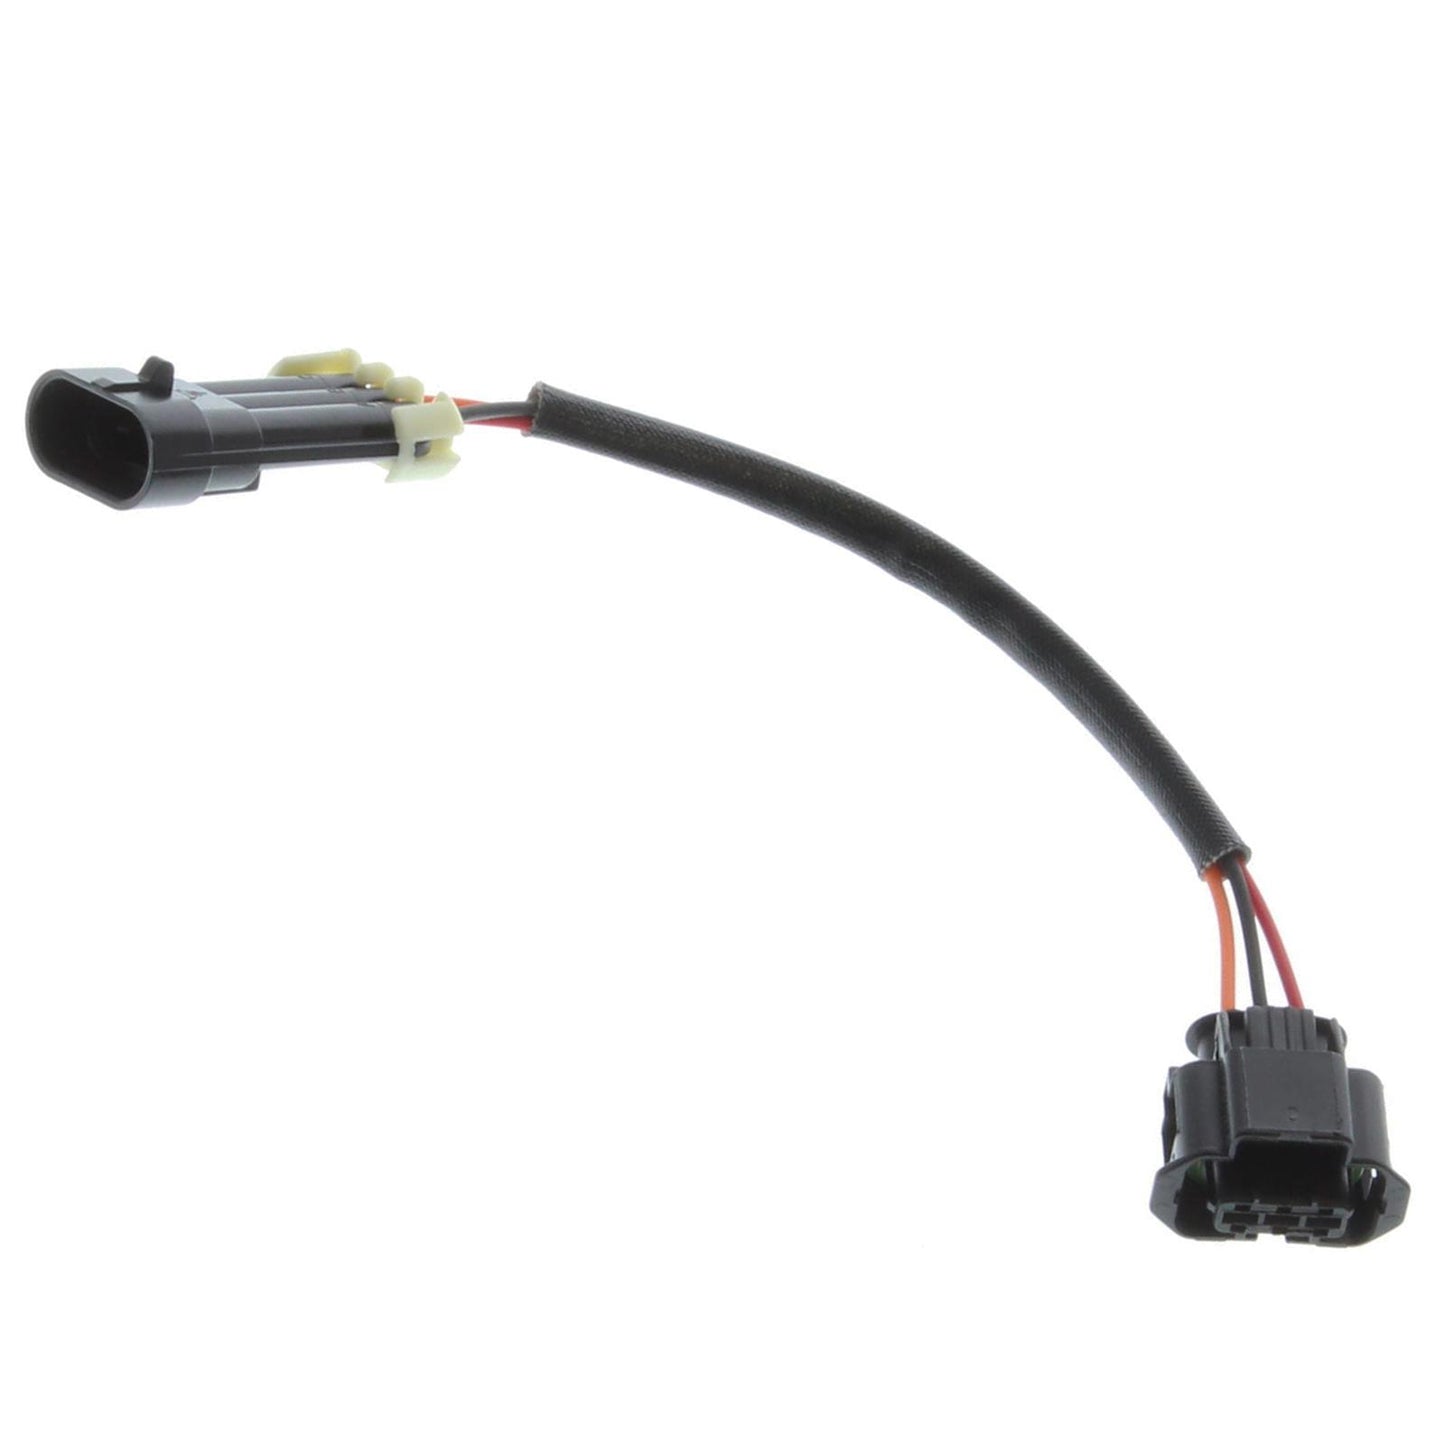 Chevrolet Performance MAP Sensors 12592525 & MAP Sensor 55567257 & LS1/2 to LS3 Adapter Harness Package